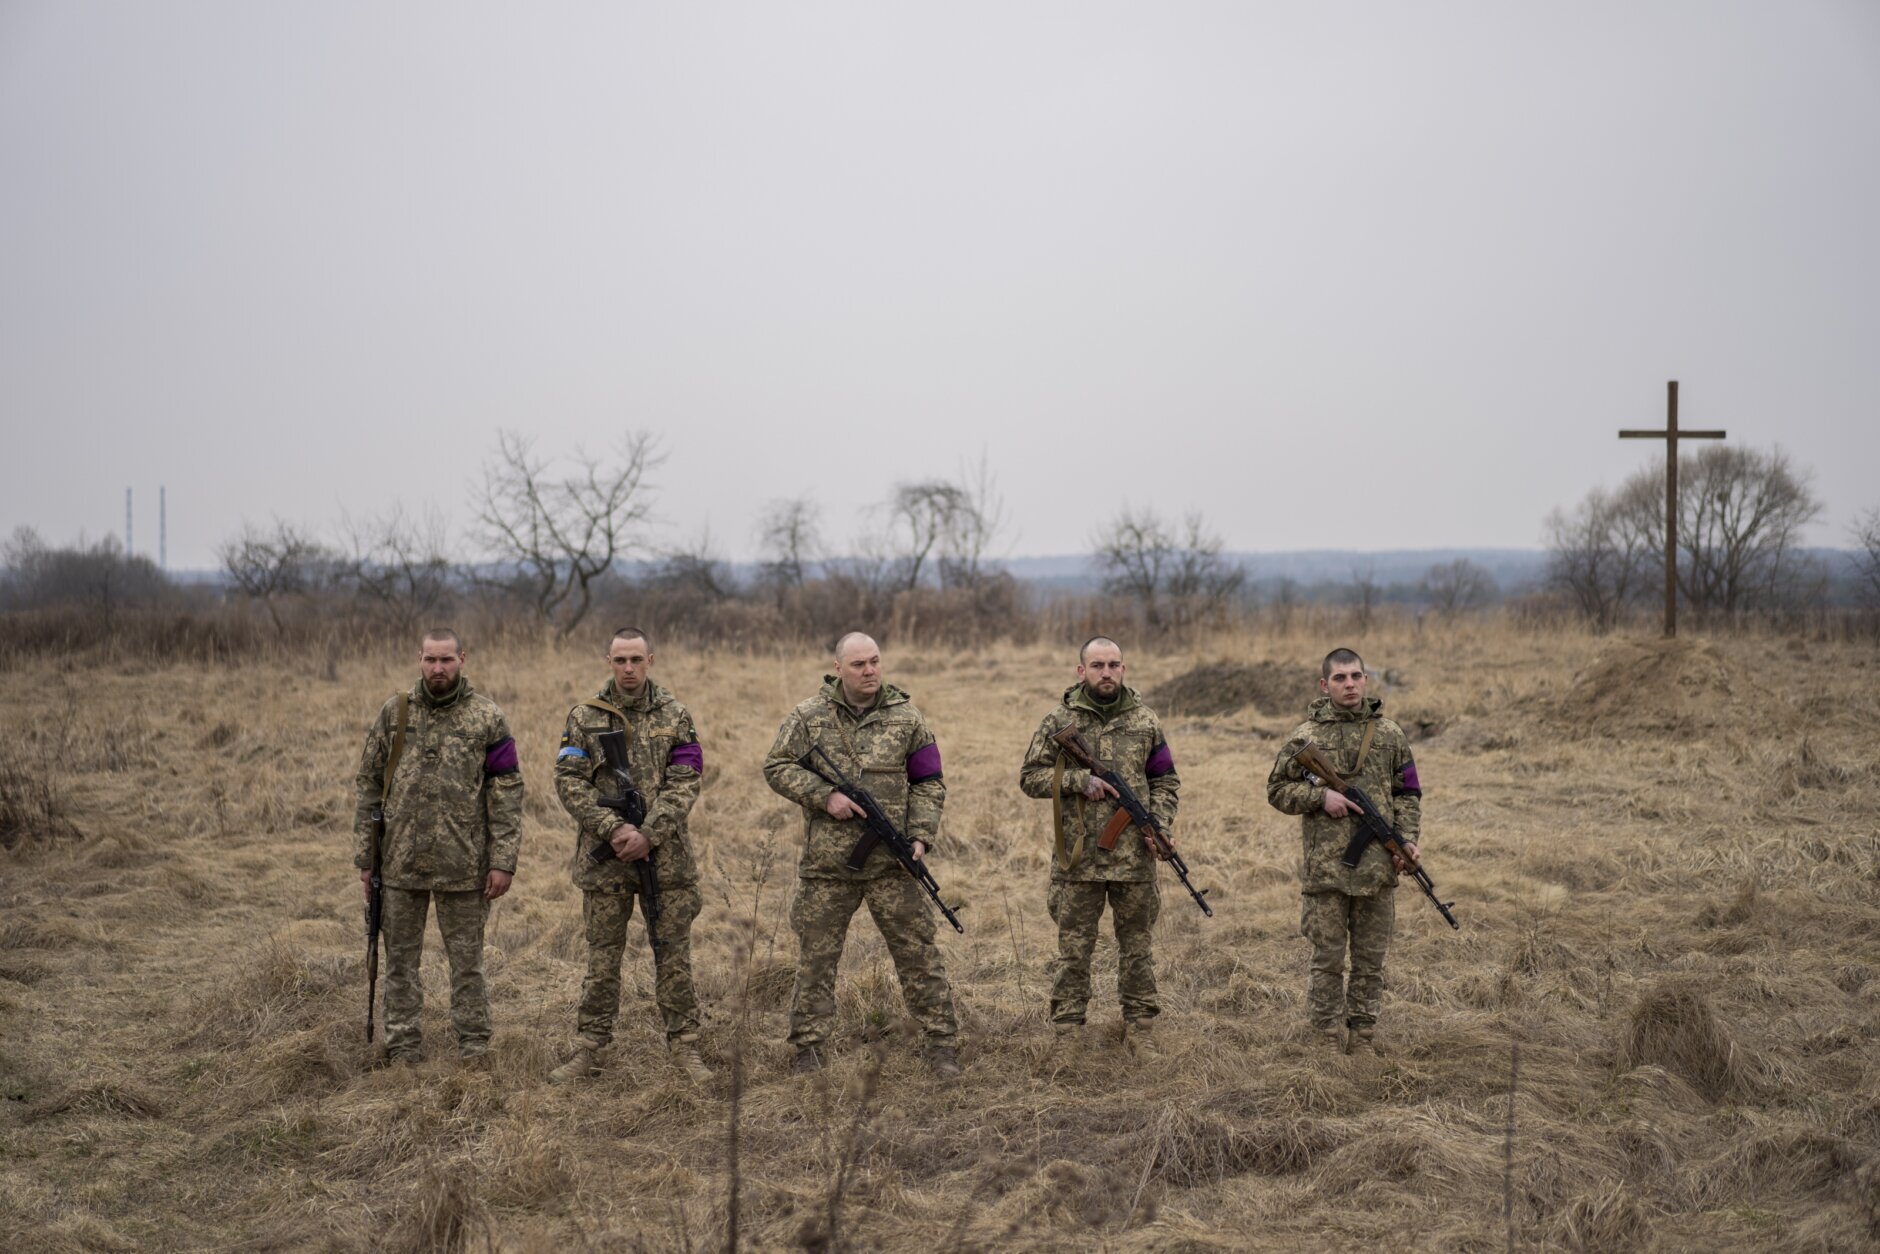 <p>Ukrainian military servicemen prepare to fire salutes during the funeral of their comrades, Roman Rak and Mykola Mykytiuk, in Starychi, western Ukraine, Wednesday, March 16, 2022. Rak and Mykytiu were killed during Sunday&#8217;s Russian missile strike on a military training base in Yavoriv.</p>
